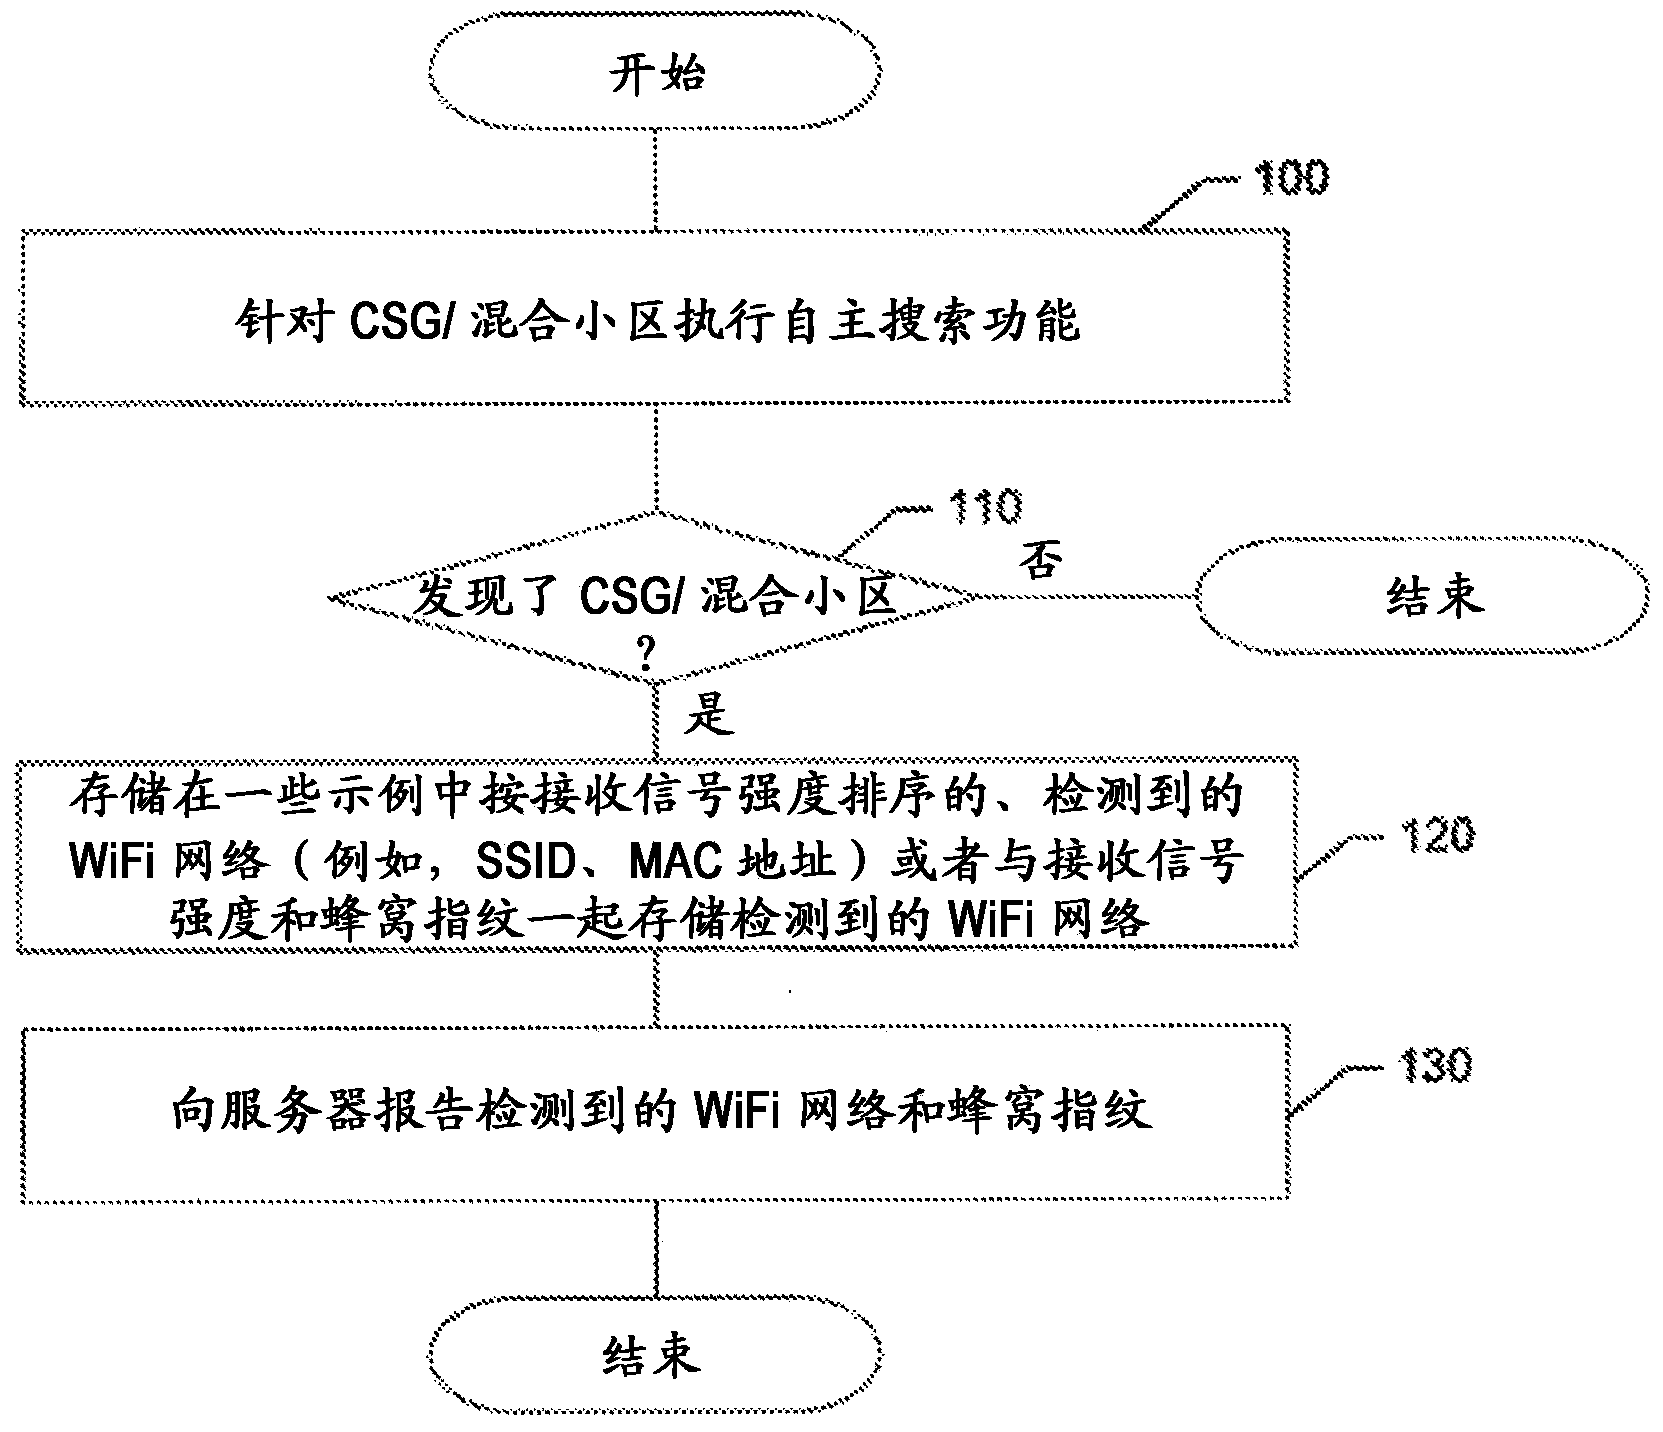 Method and apparatus for providing a network search function